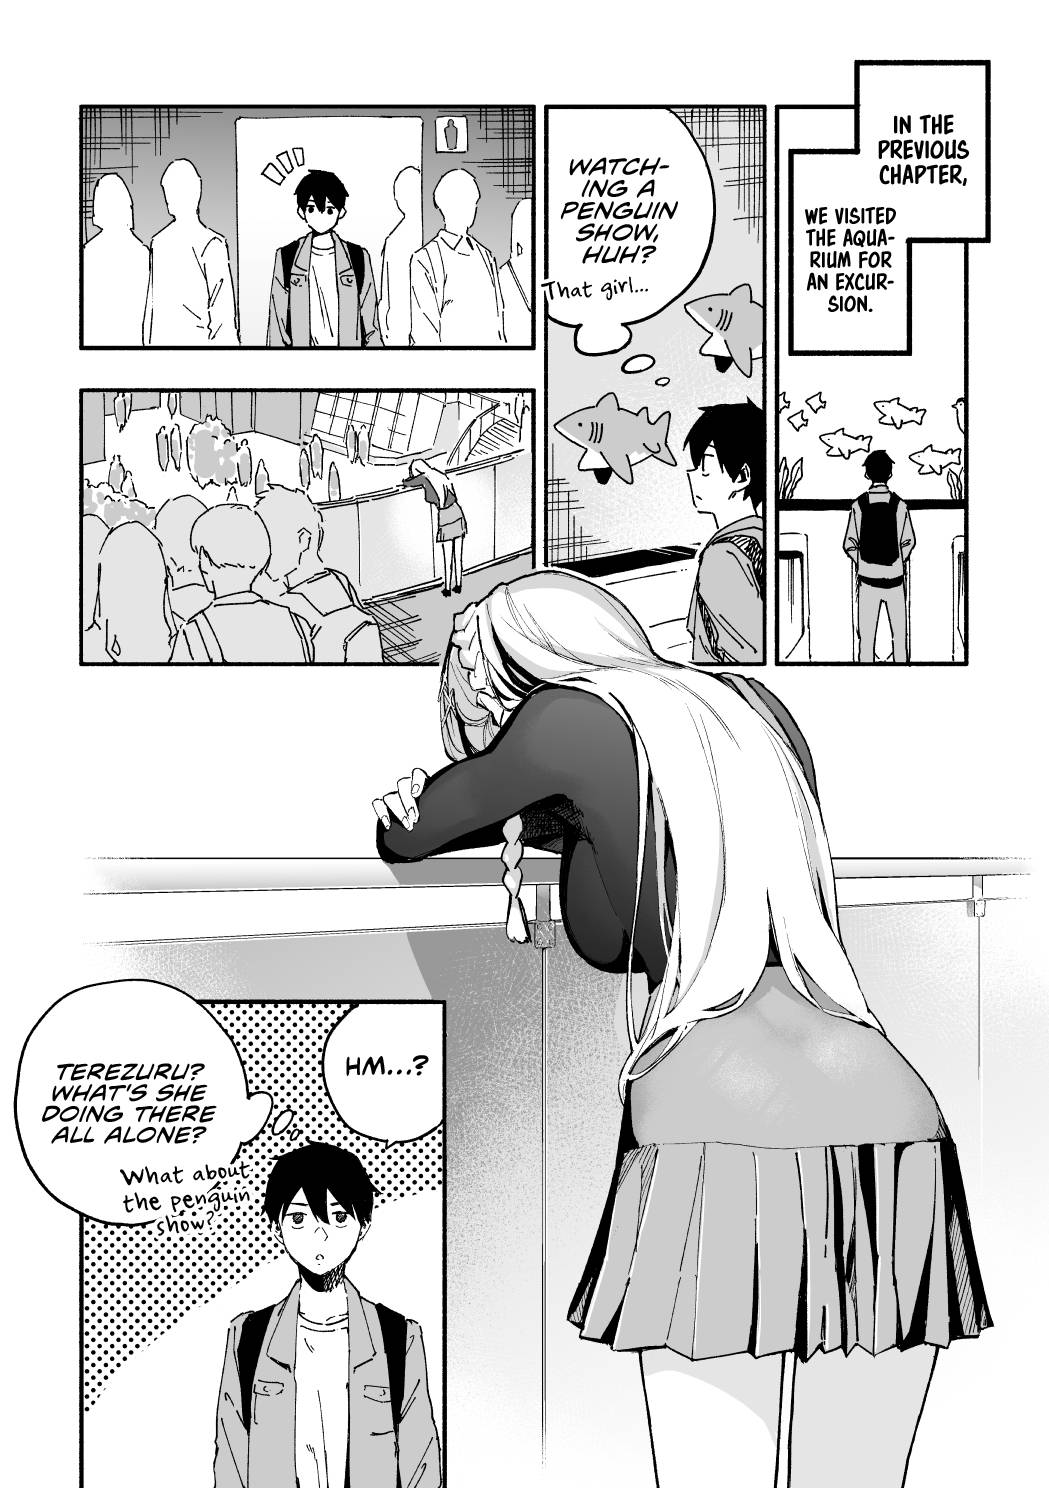 The Angelic Transfer Student and Mastophobia-kun - chapter 12 - #1